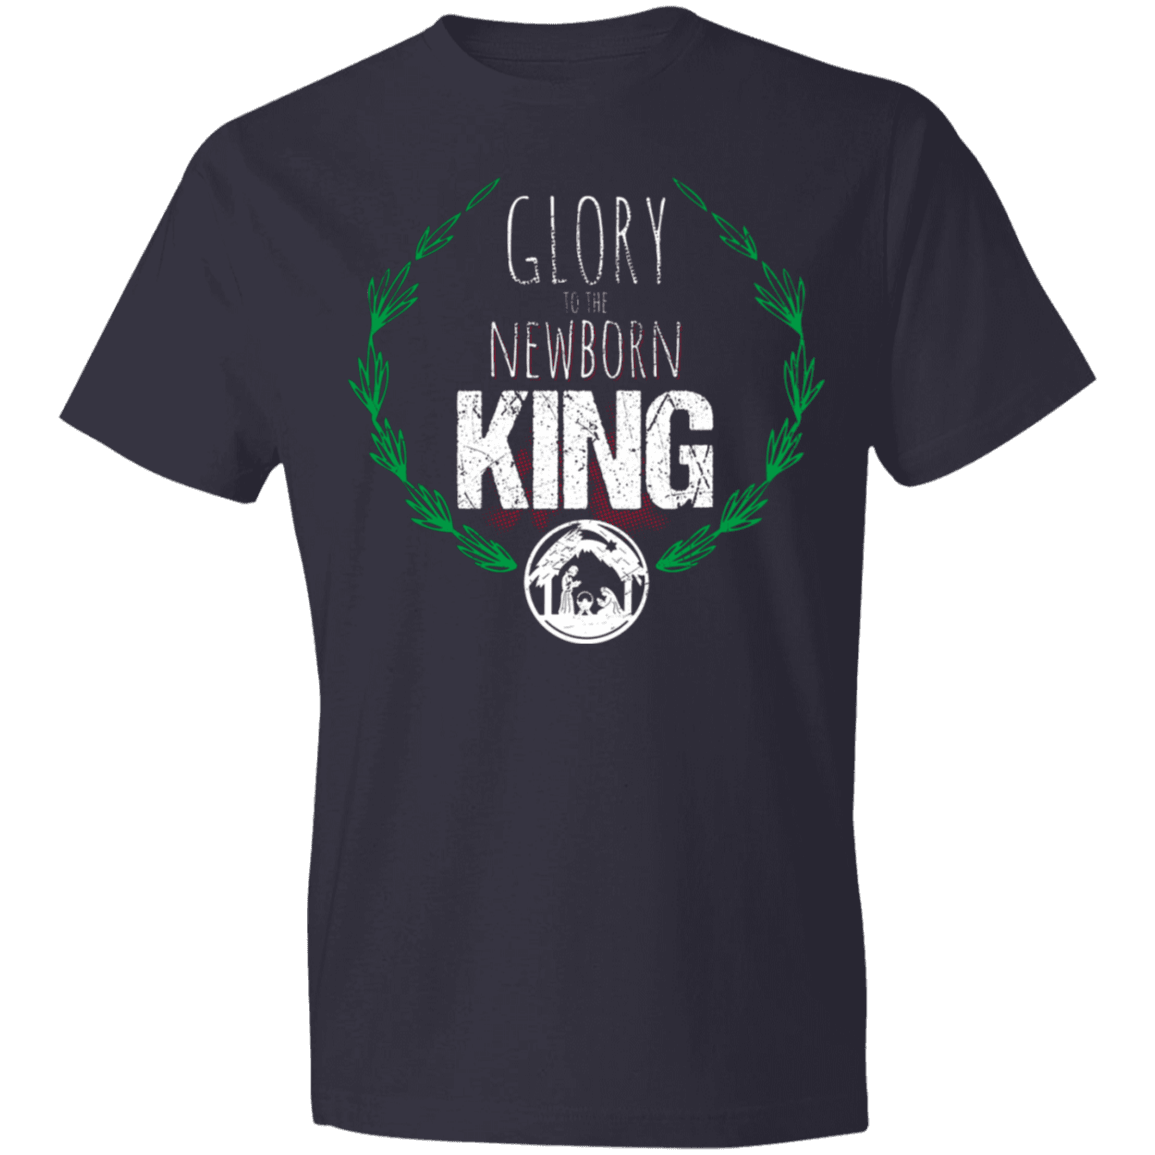 Designs by MyUtopia Shout Out:Glory to the Newborn King - Lightweight T-Shirt,Navy / S,Adult Unisex T-Shirt